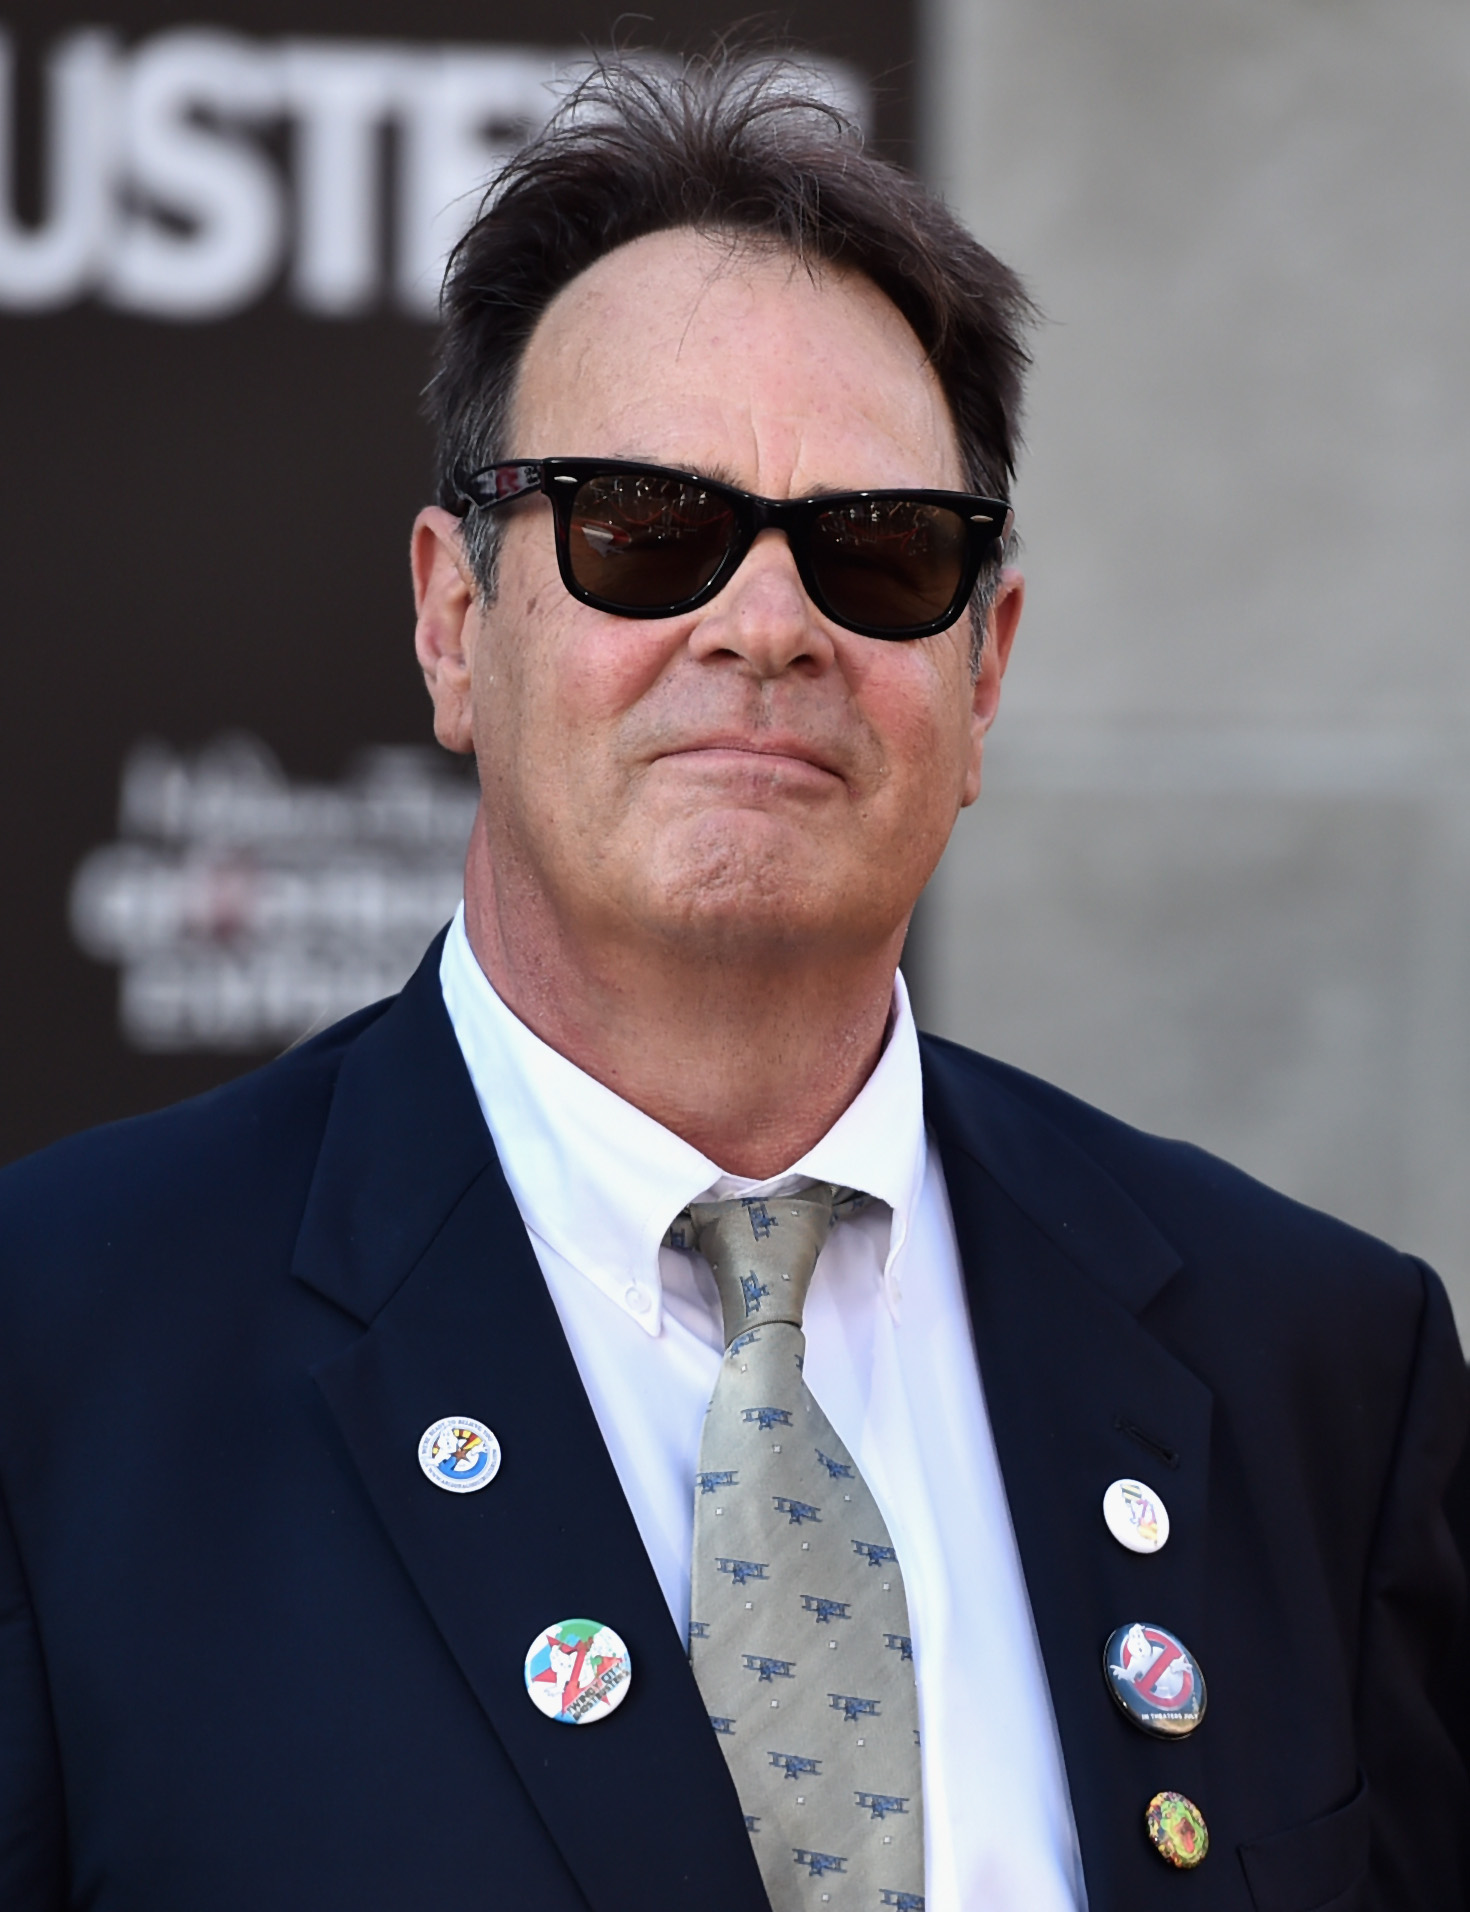 Actor Dan Aykroyd arrives at the Premiere of Sony Pictures' 'Ghostbusters' at TCL Chinese Theatre on July 9, 2016 in Hollywood, California. (Alberto E. Rodriguez/Getty Images)